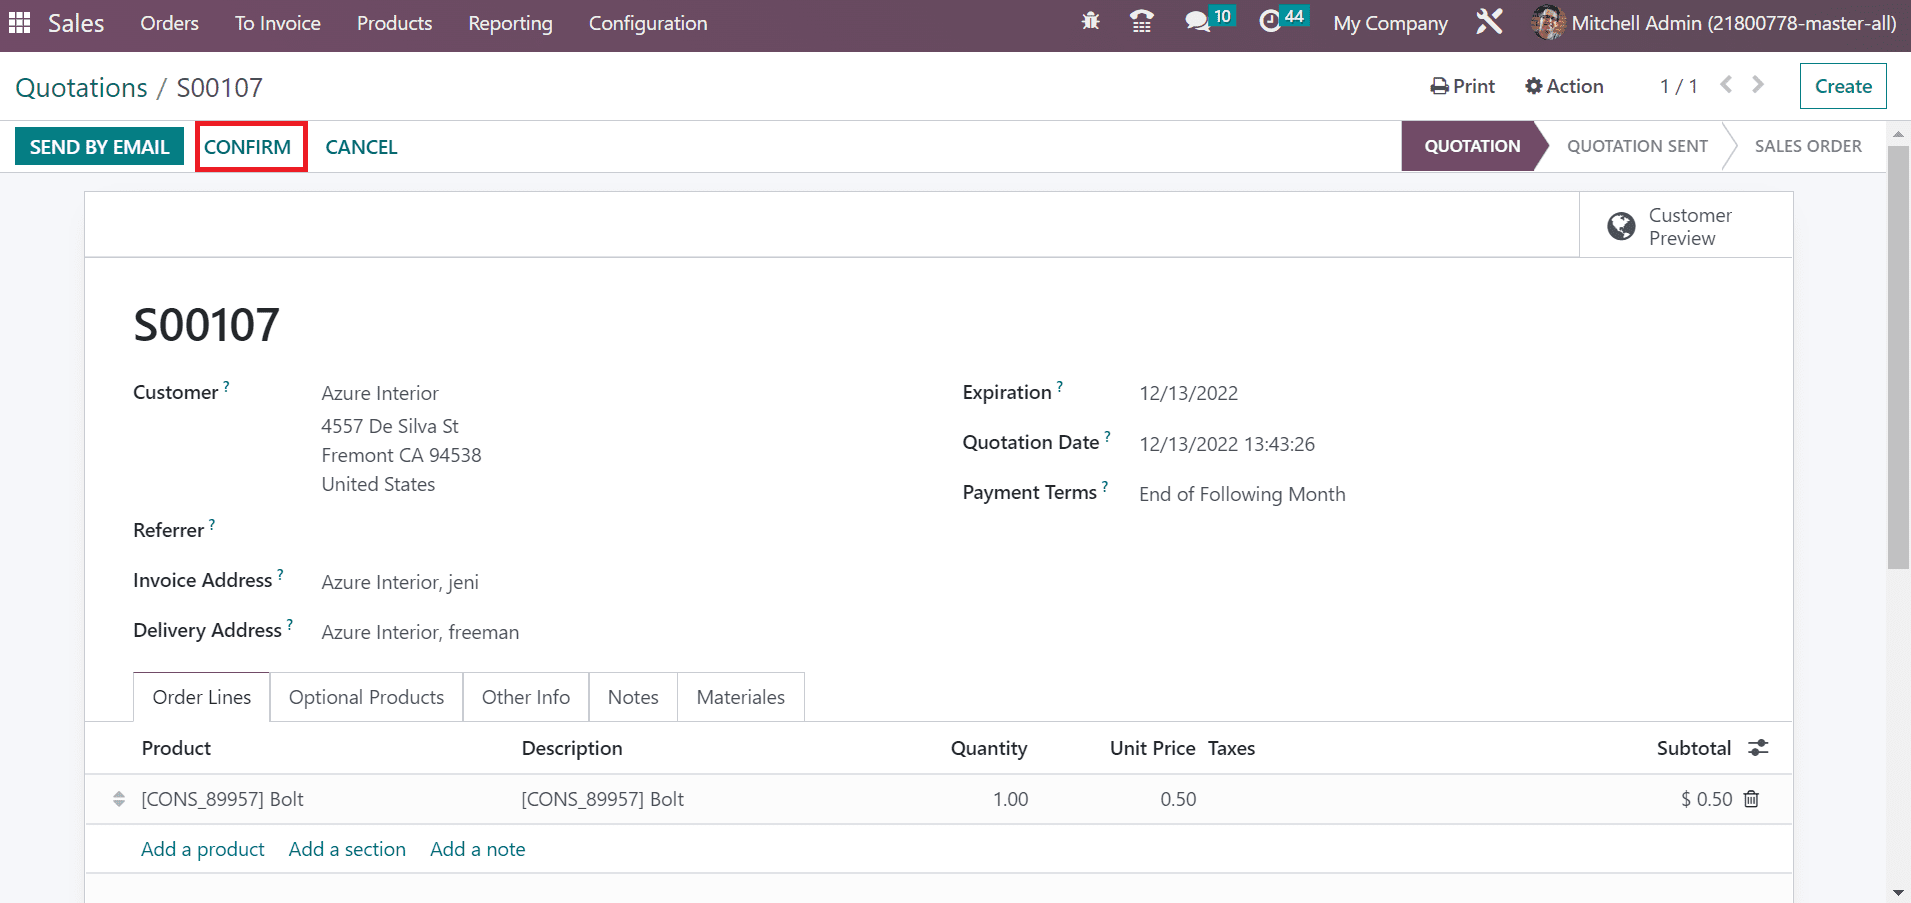 how-to-create-an-invoice-from-odoo-16-sales-quotation-send-product-information-8-cybrosys